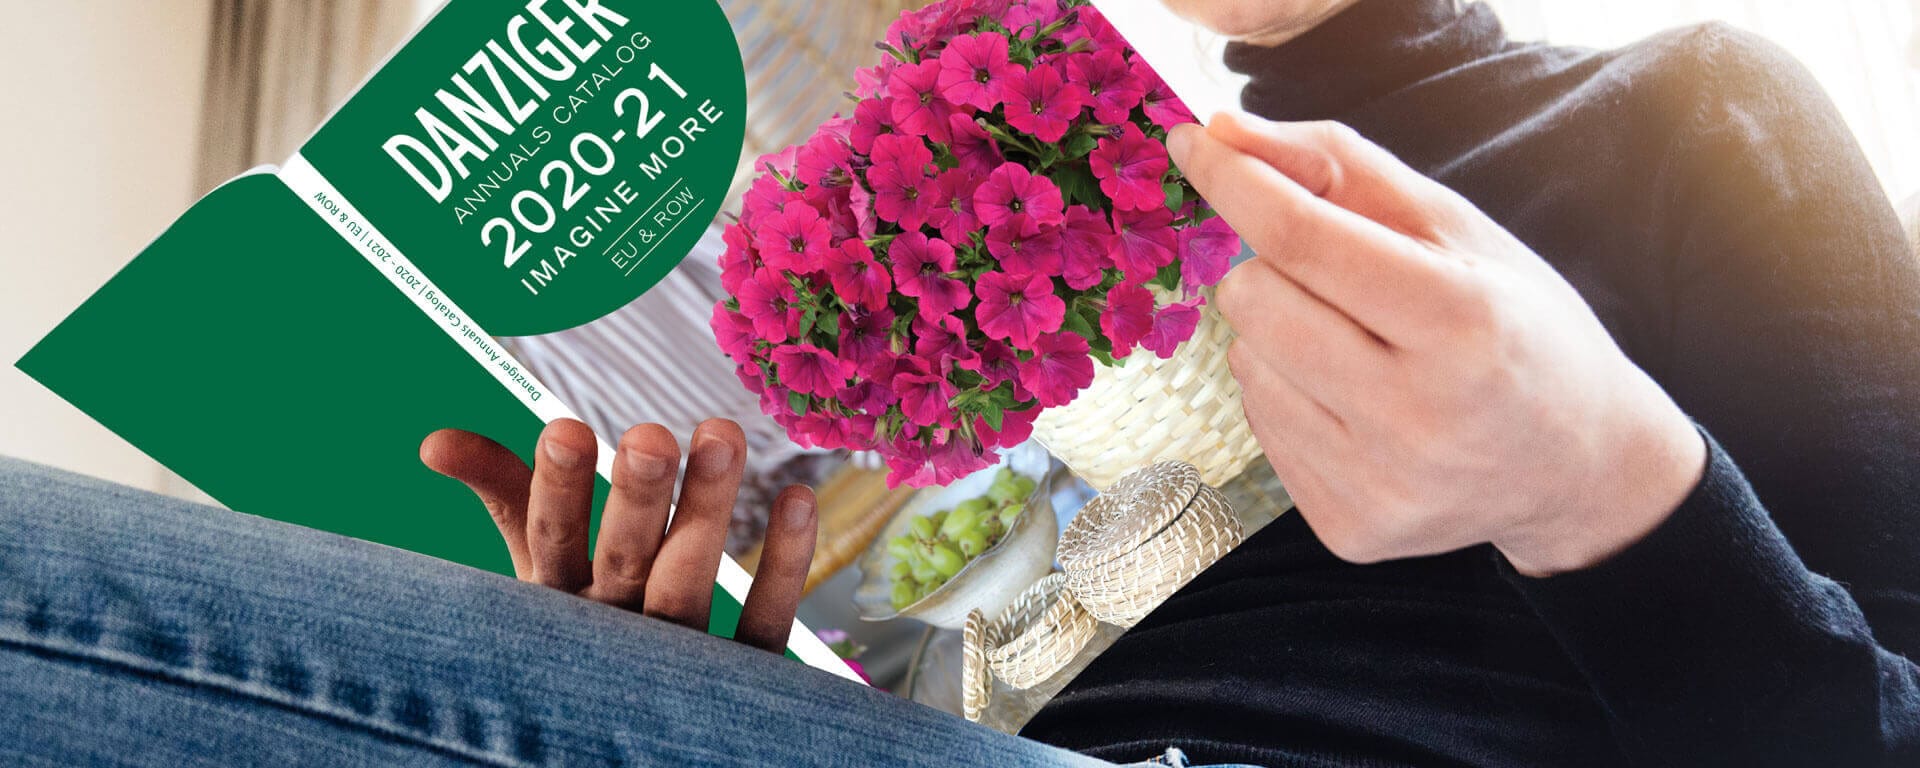 Danziger Launches its New Annuals Catalog for the 20-21 Season